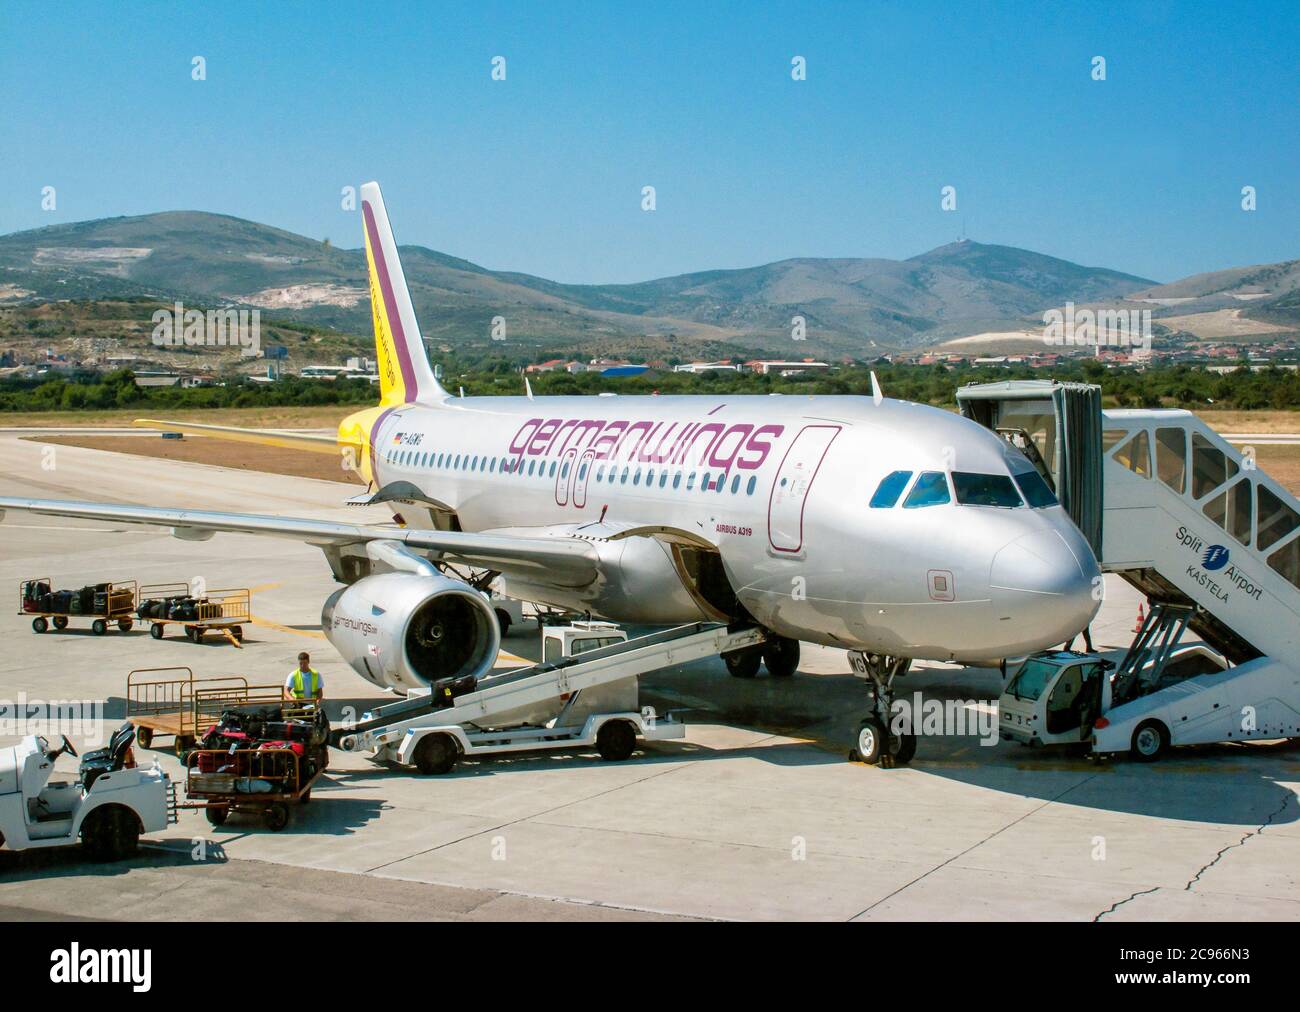 Split, Dalmatia, Croatia - At Split airport, luggage is loaded onto an aircraft of the German airline germanwings. Stock Photo